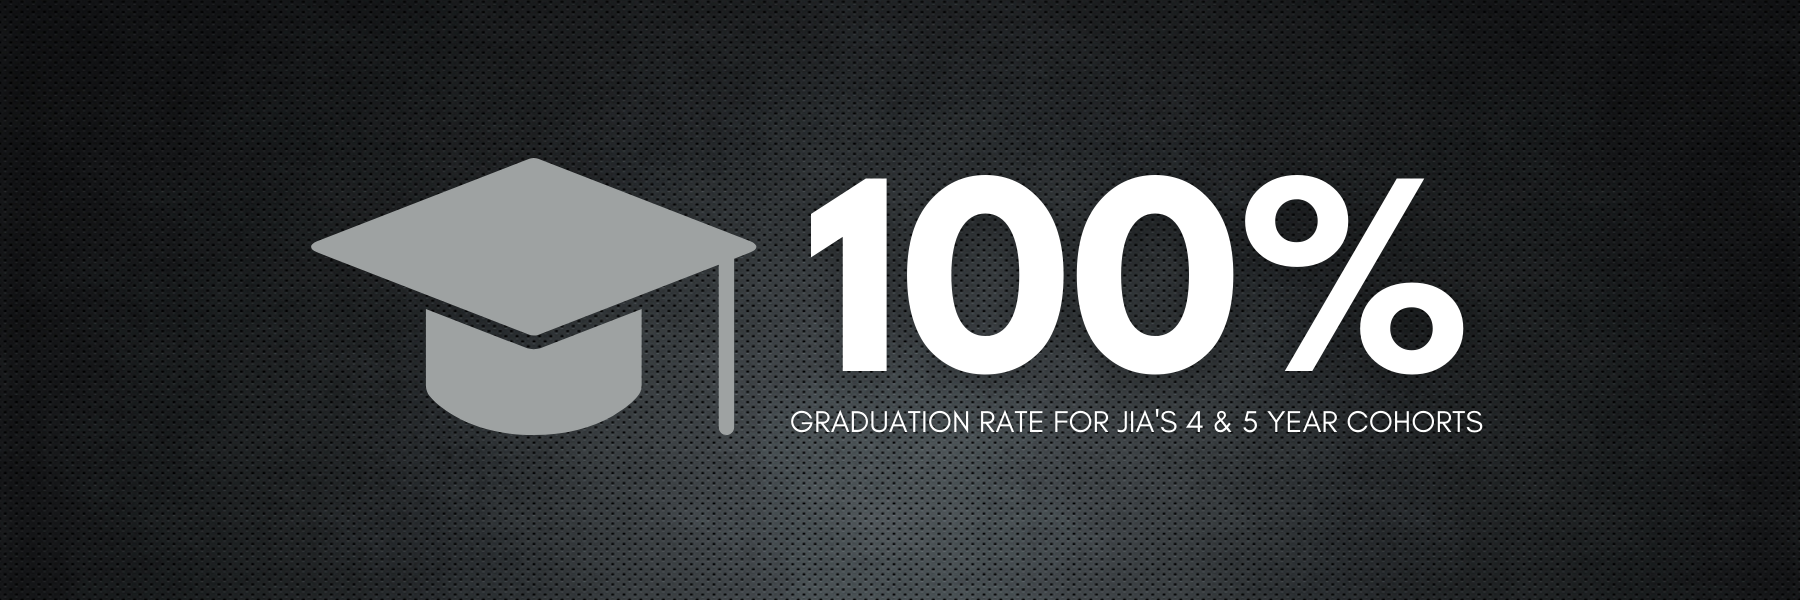 100% Graduation Rate for JIA&#39;s 4 & 5 Year Cohorts